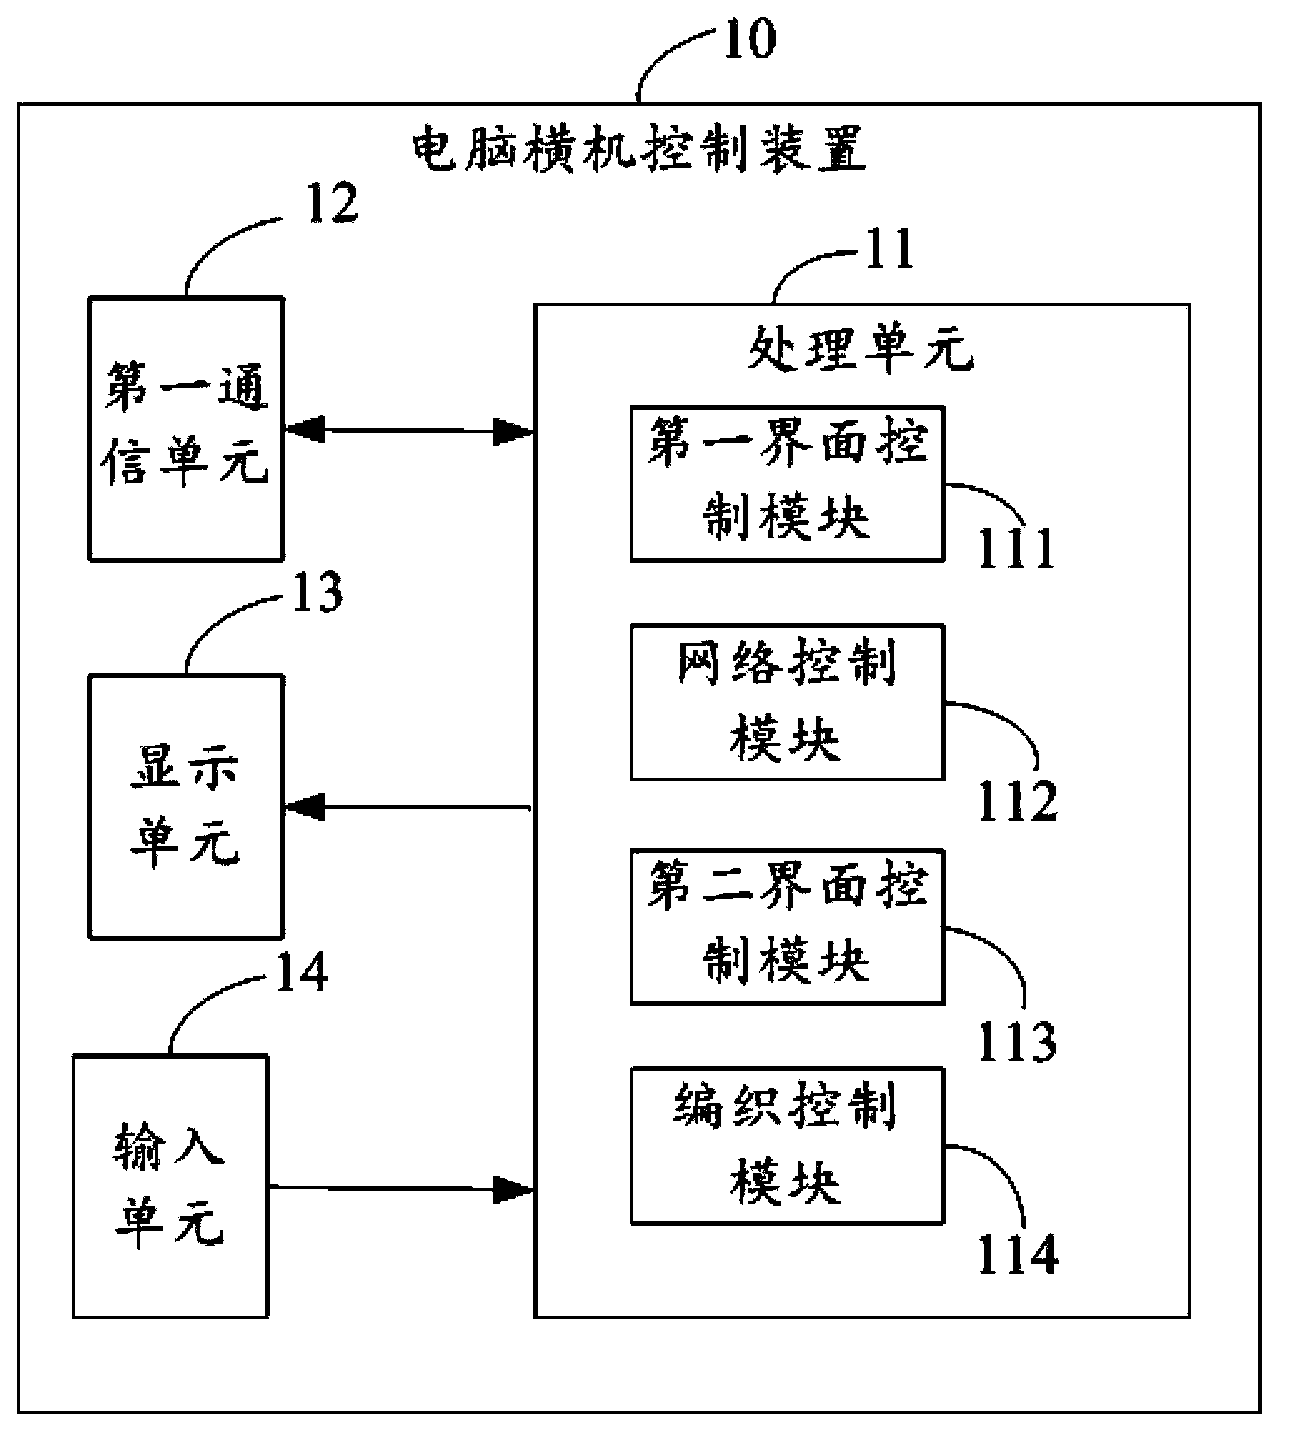 Device, system and method for controlling computerized flat knitting machine